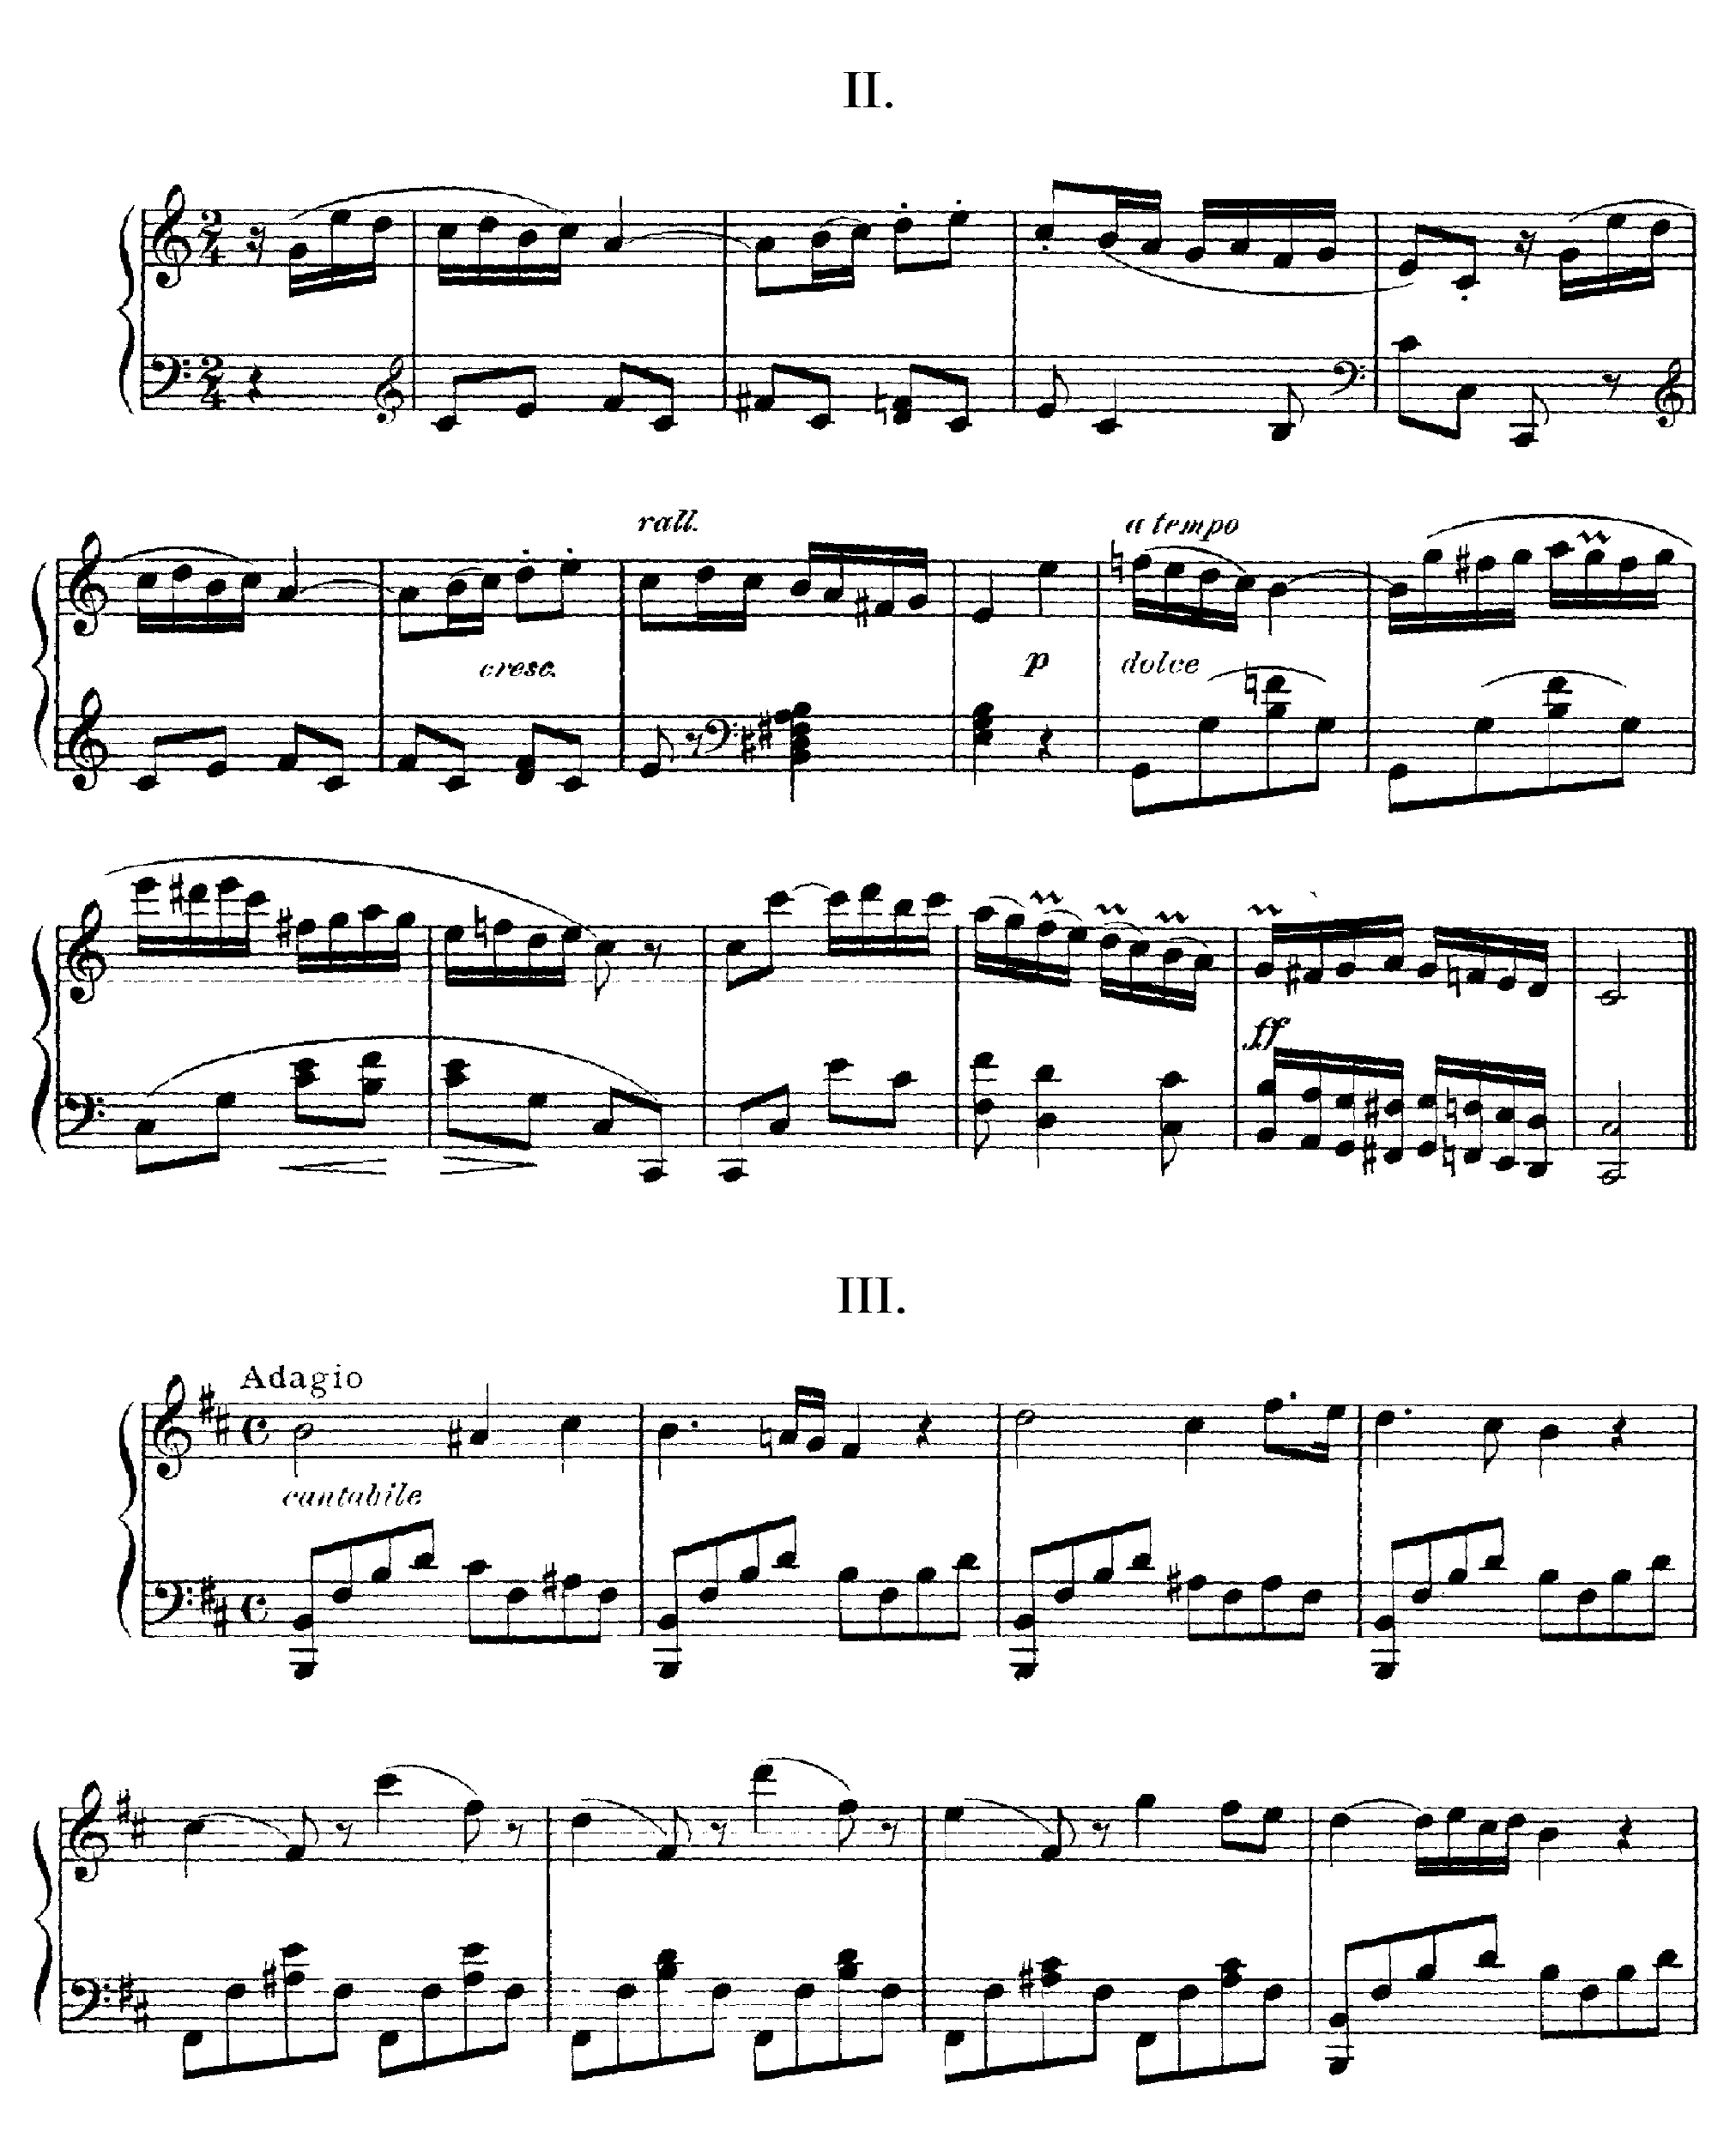 ﻿Franck, César - 3 Early Pieces Sheet music for Piano - 8notes.com